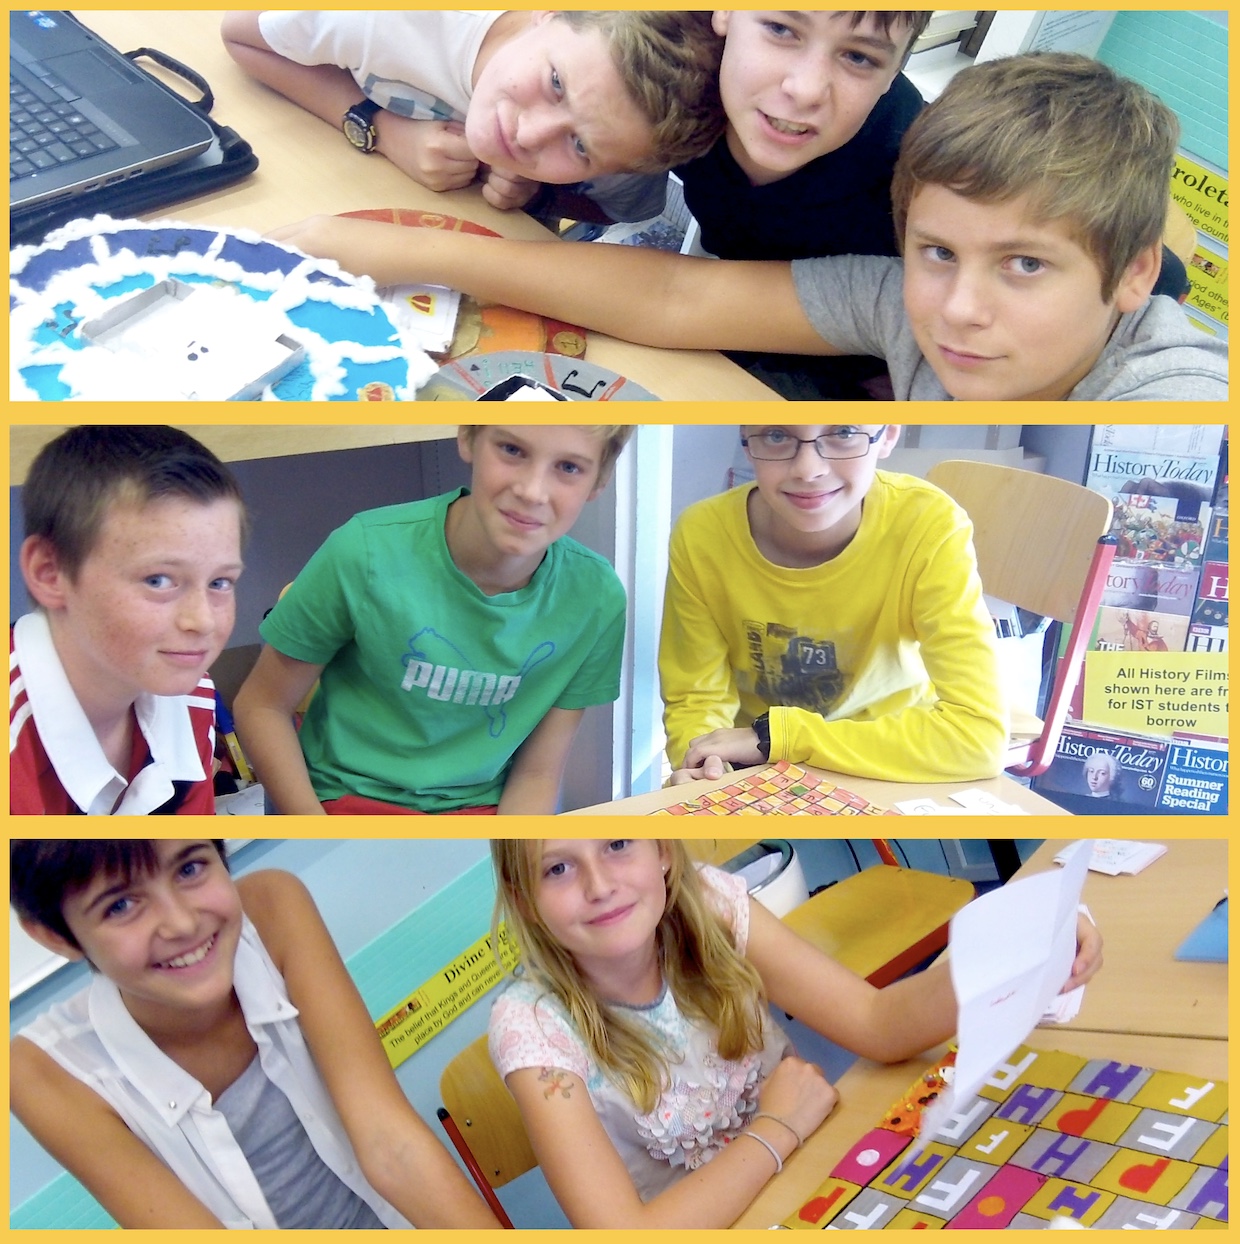 Church boardgames at the International School of Toulouse